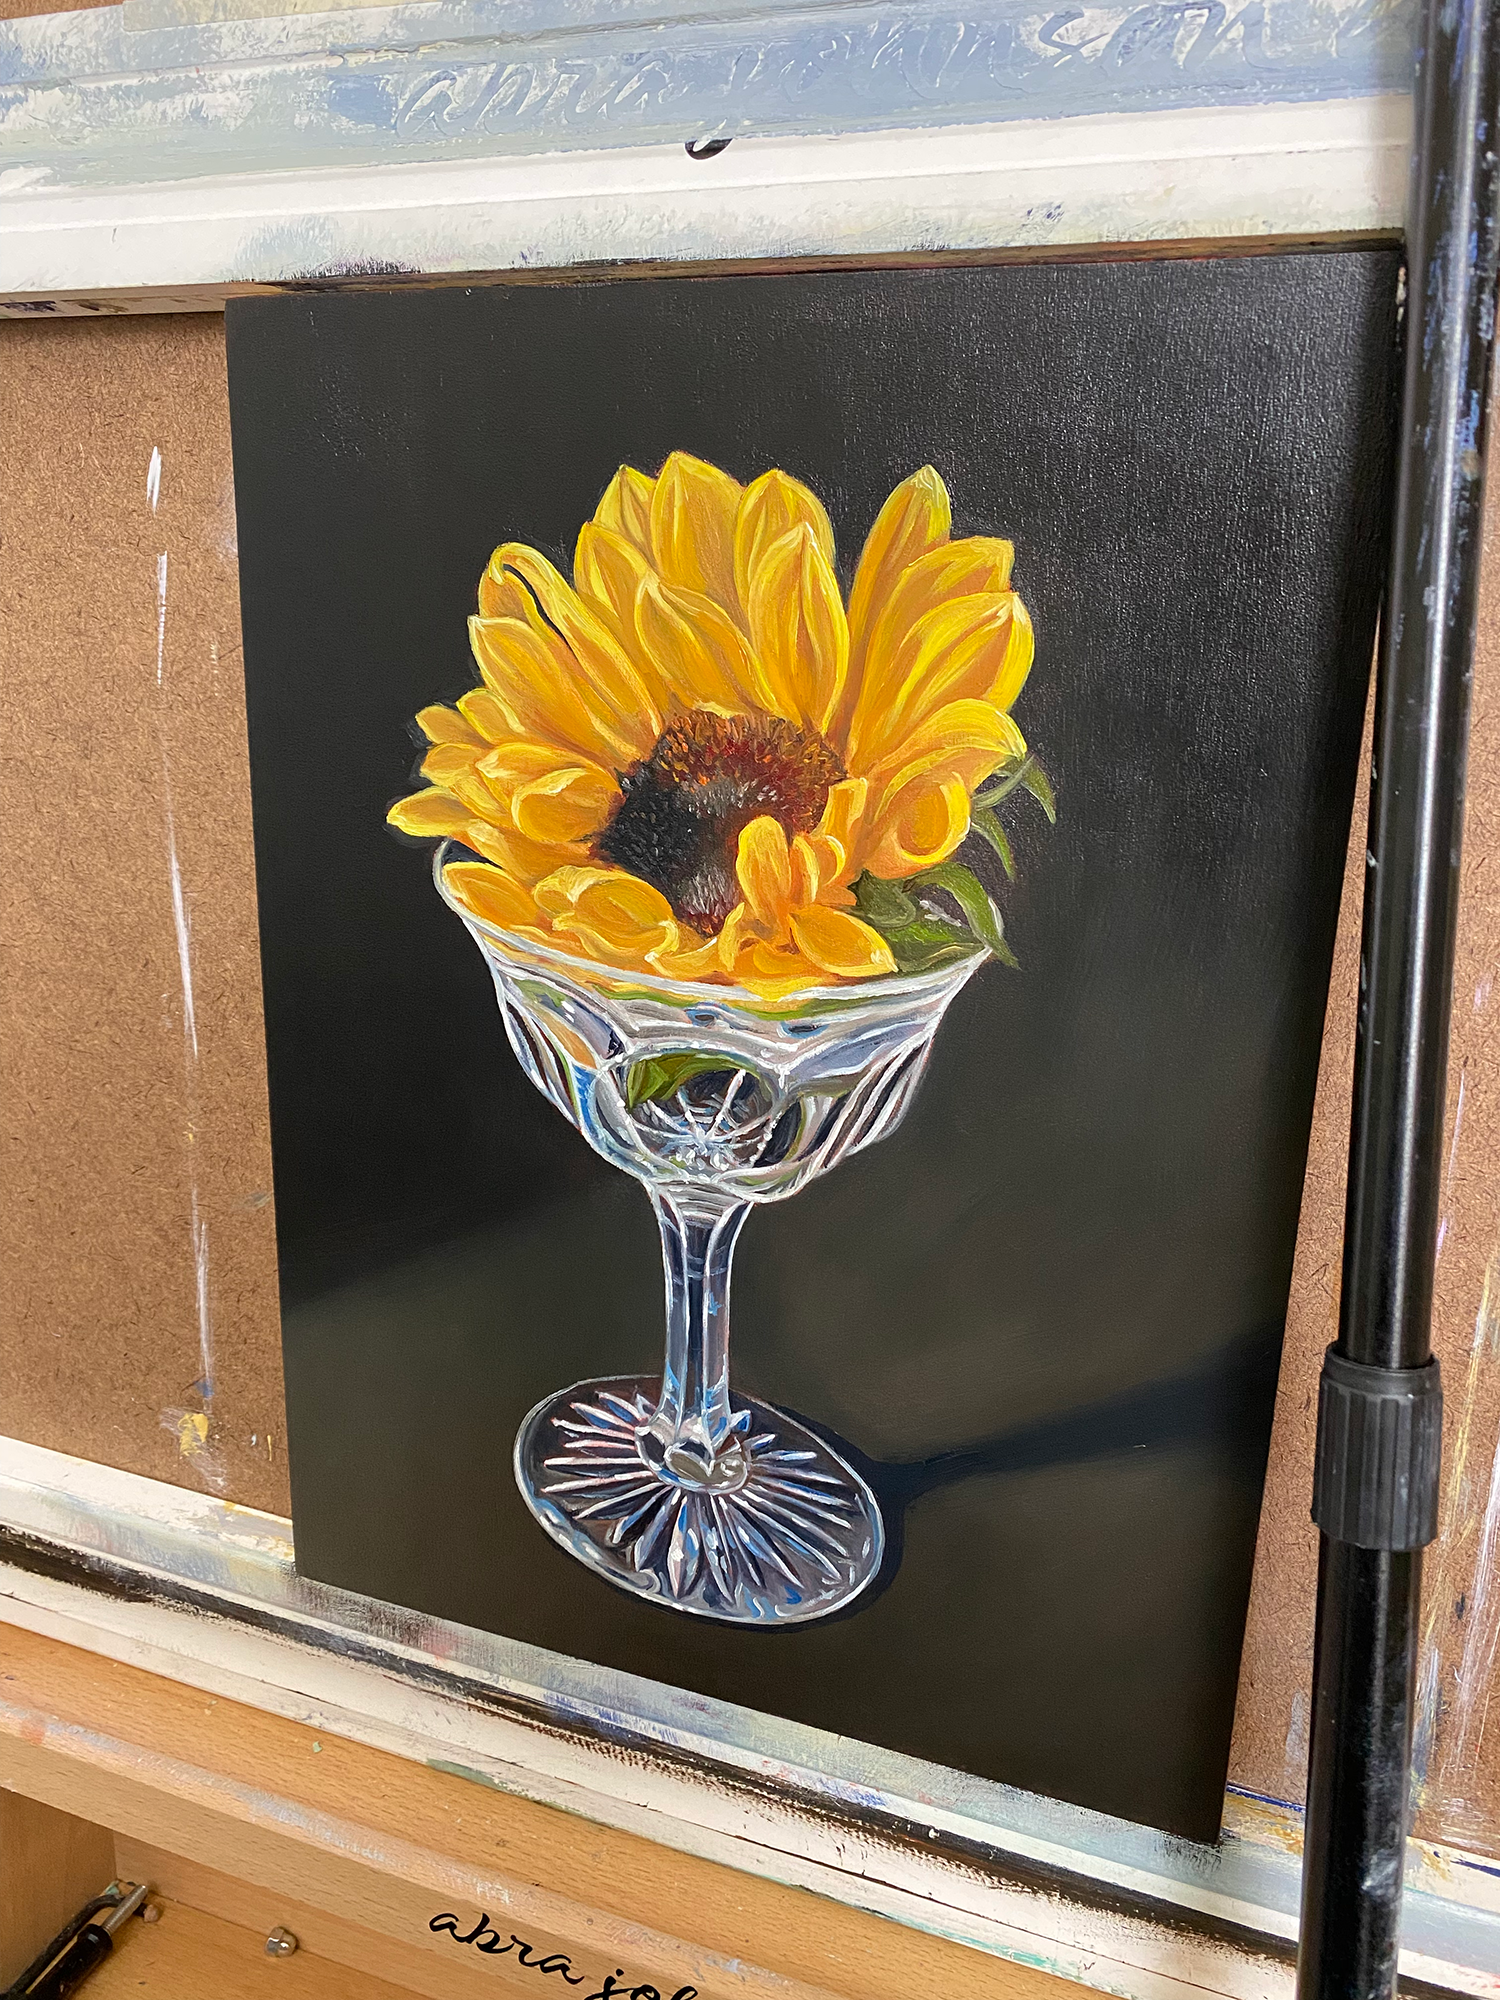 "Summer Cocktail" 9x12" Original Oil Painting by Abra Johnson